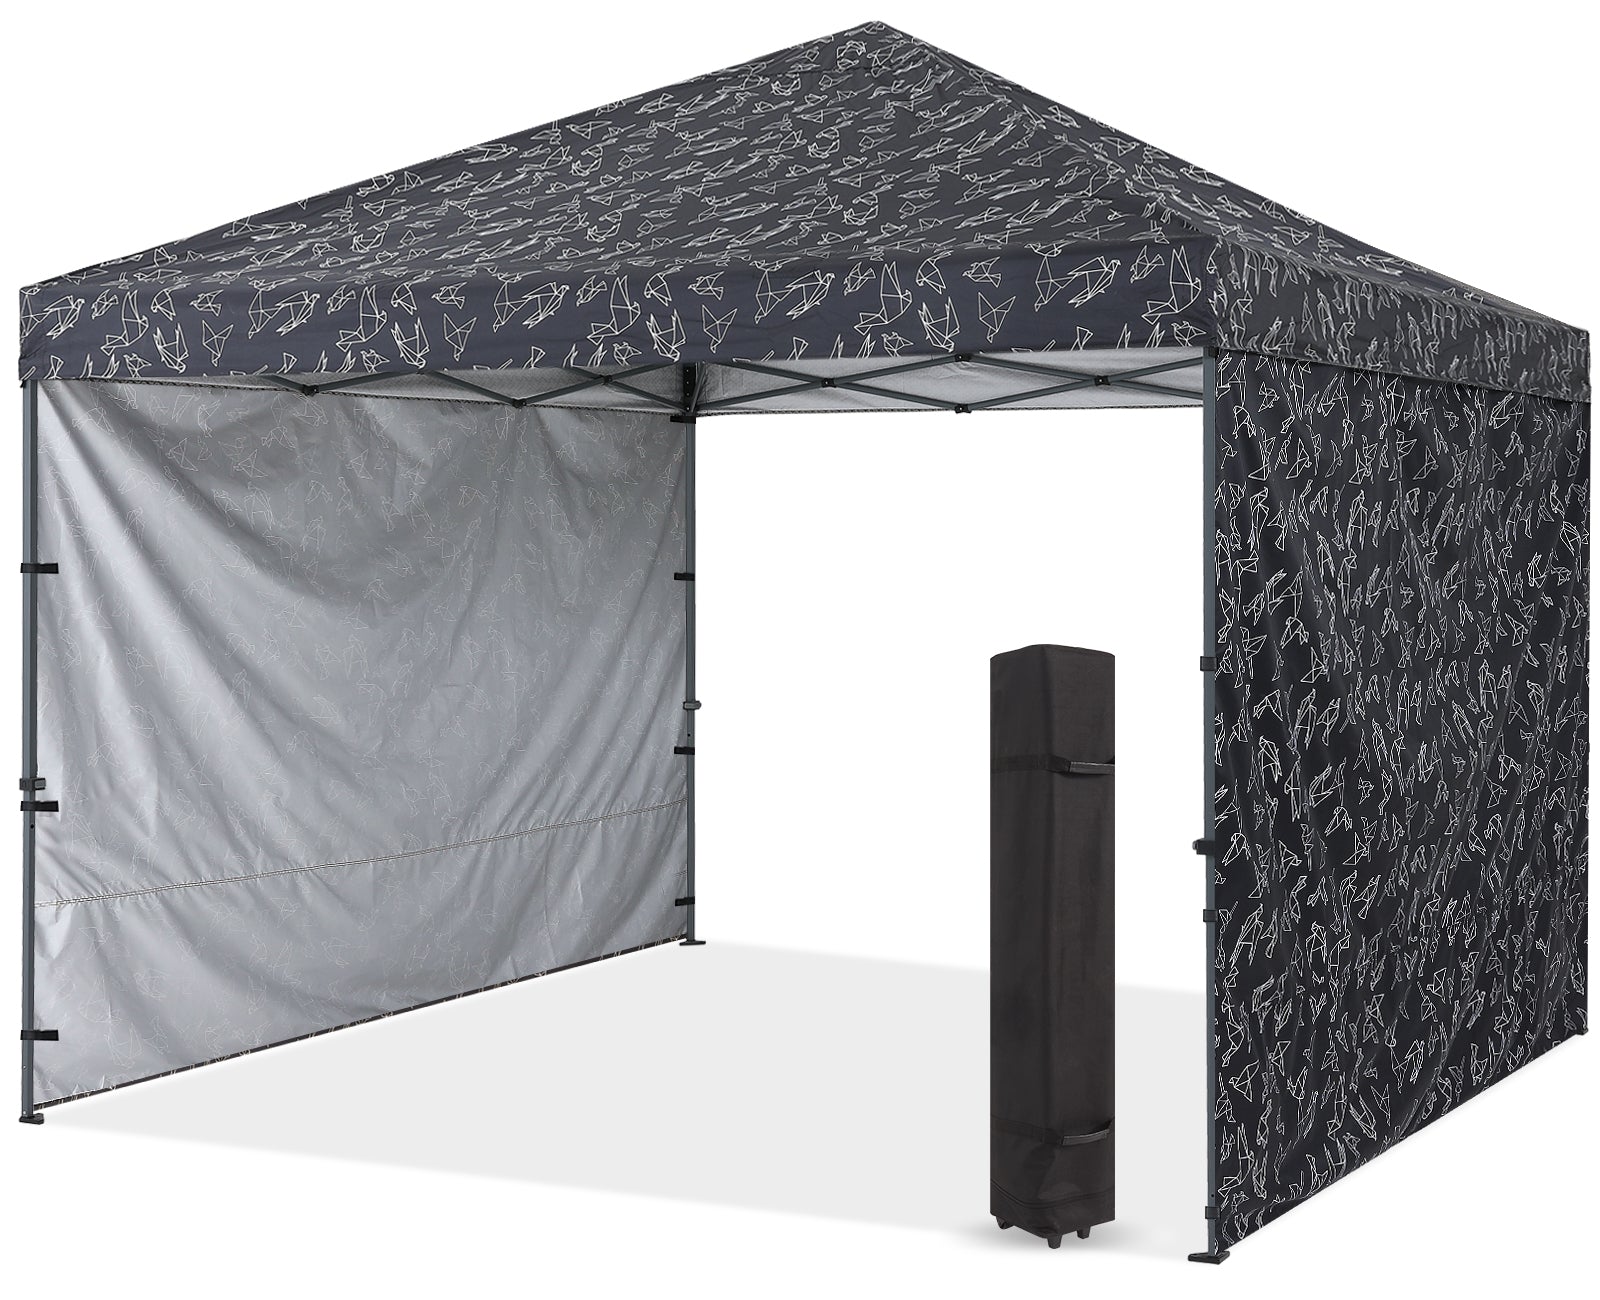 Outdoor Easy Pop up 10x10 Canopy Tent With Graphic Print and 2 Sun Walls